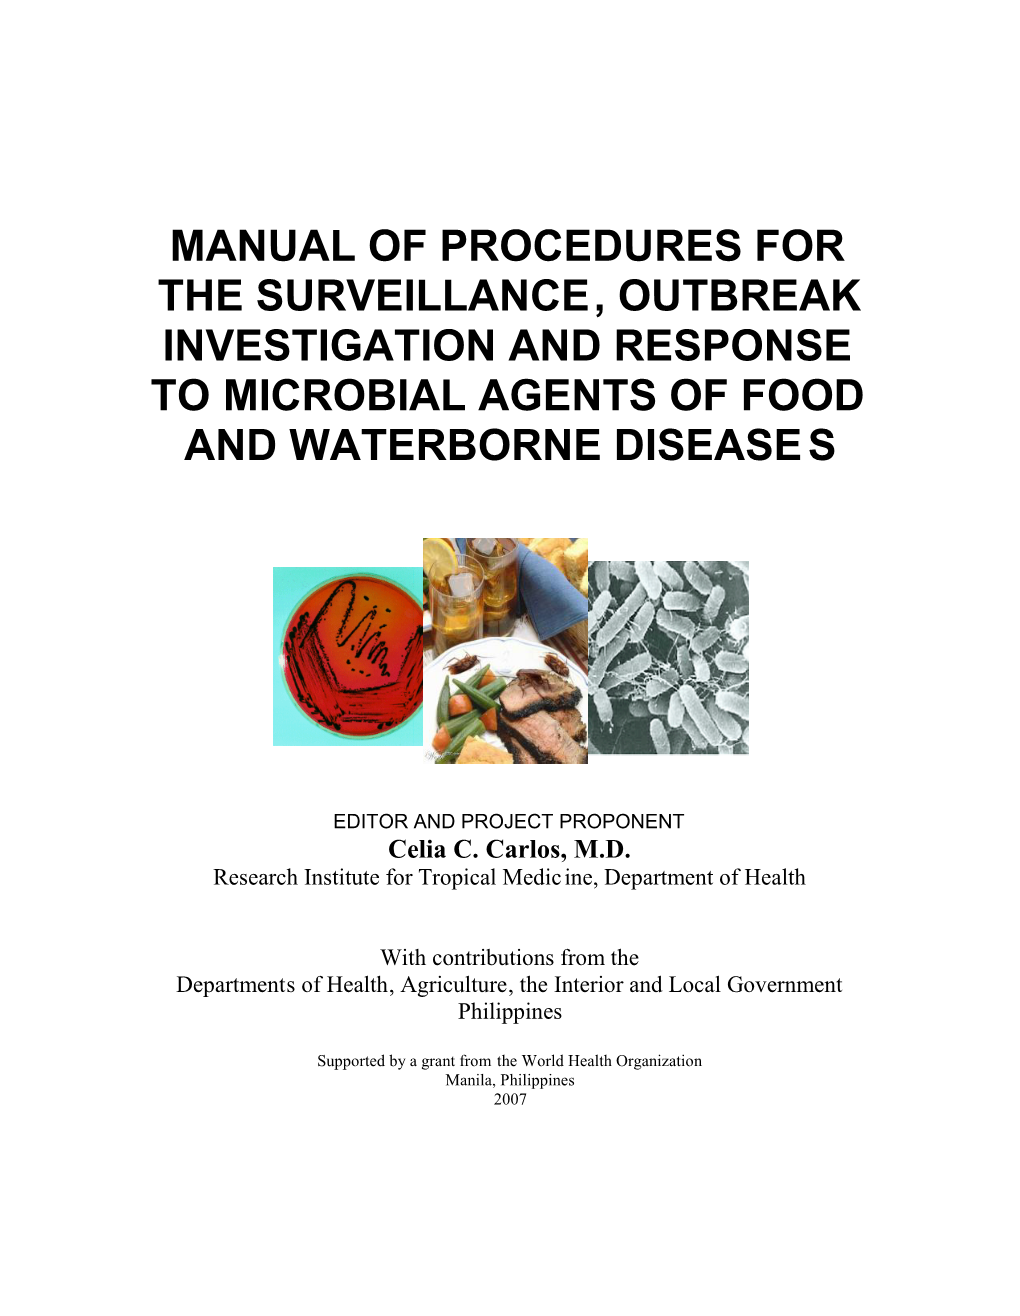 Manual of Procedures for the Surveillance, Outbreak Investigation and Response to Microbial Agents of Food and Waterborne Diseases